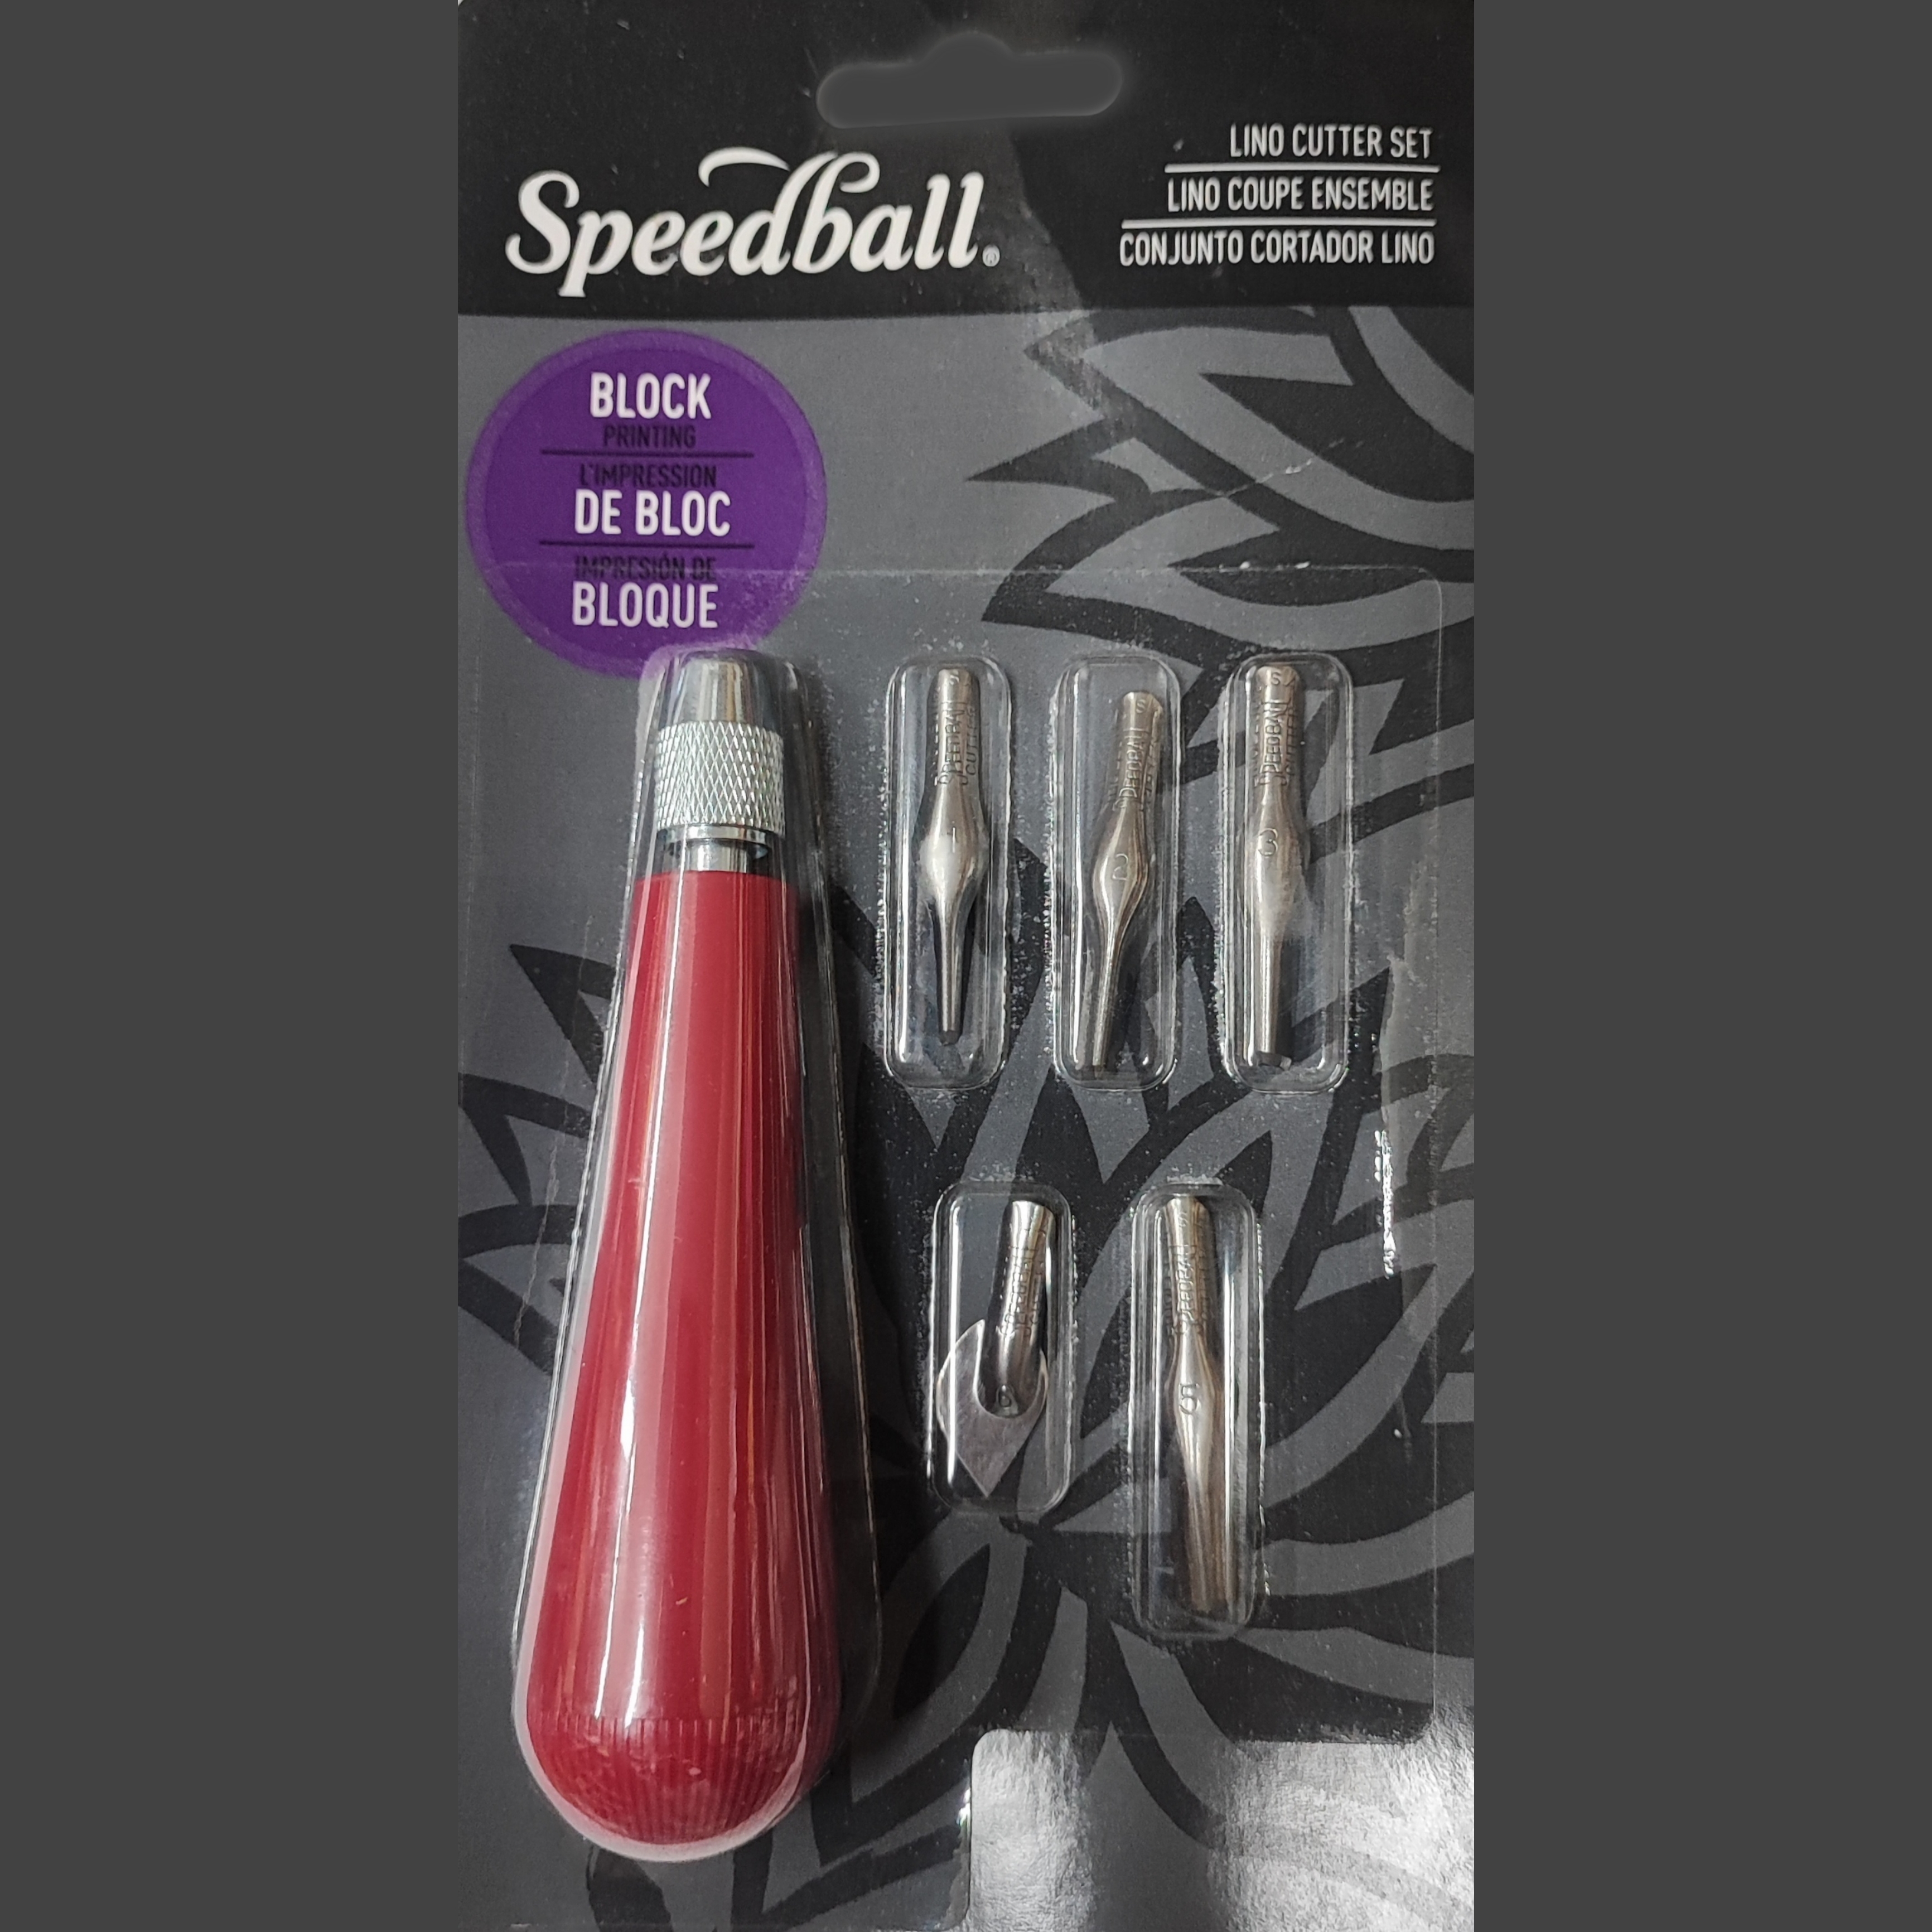 <p><strong><span style="color: rgb(0, 0, 0)">Speedball lino cutter</span></strong></p>